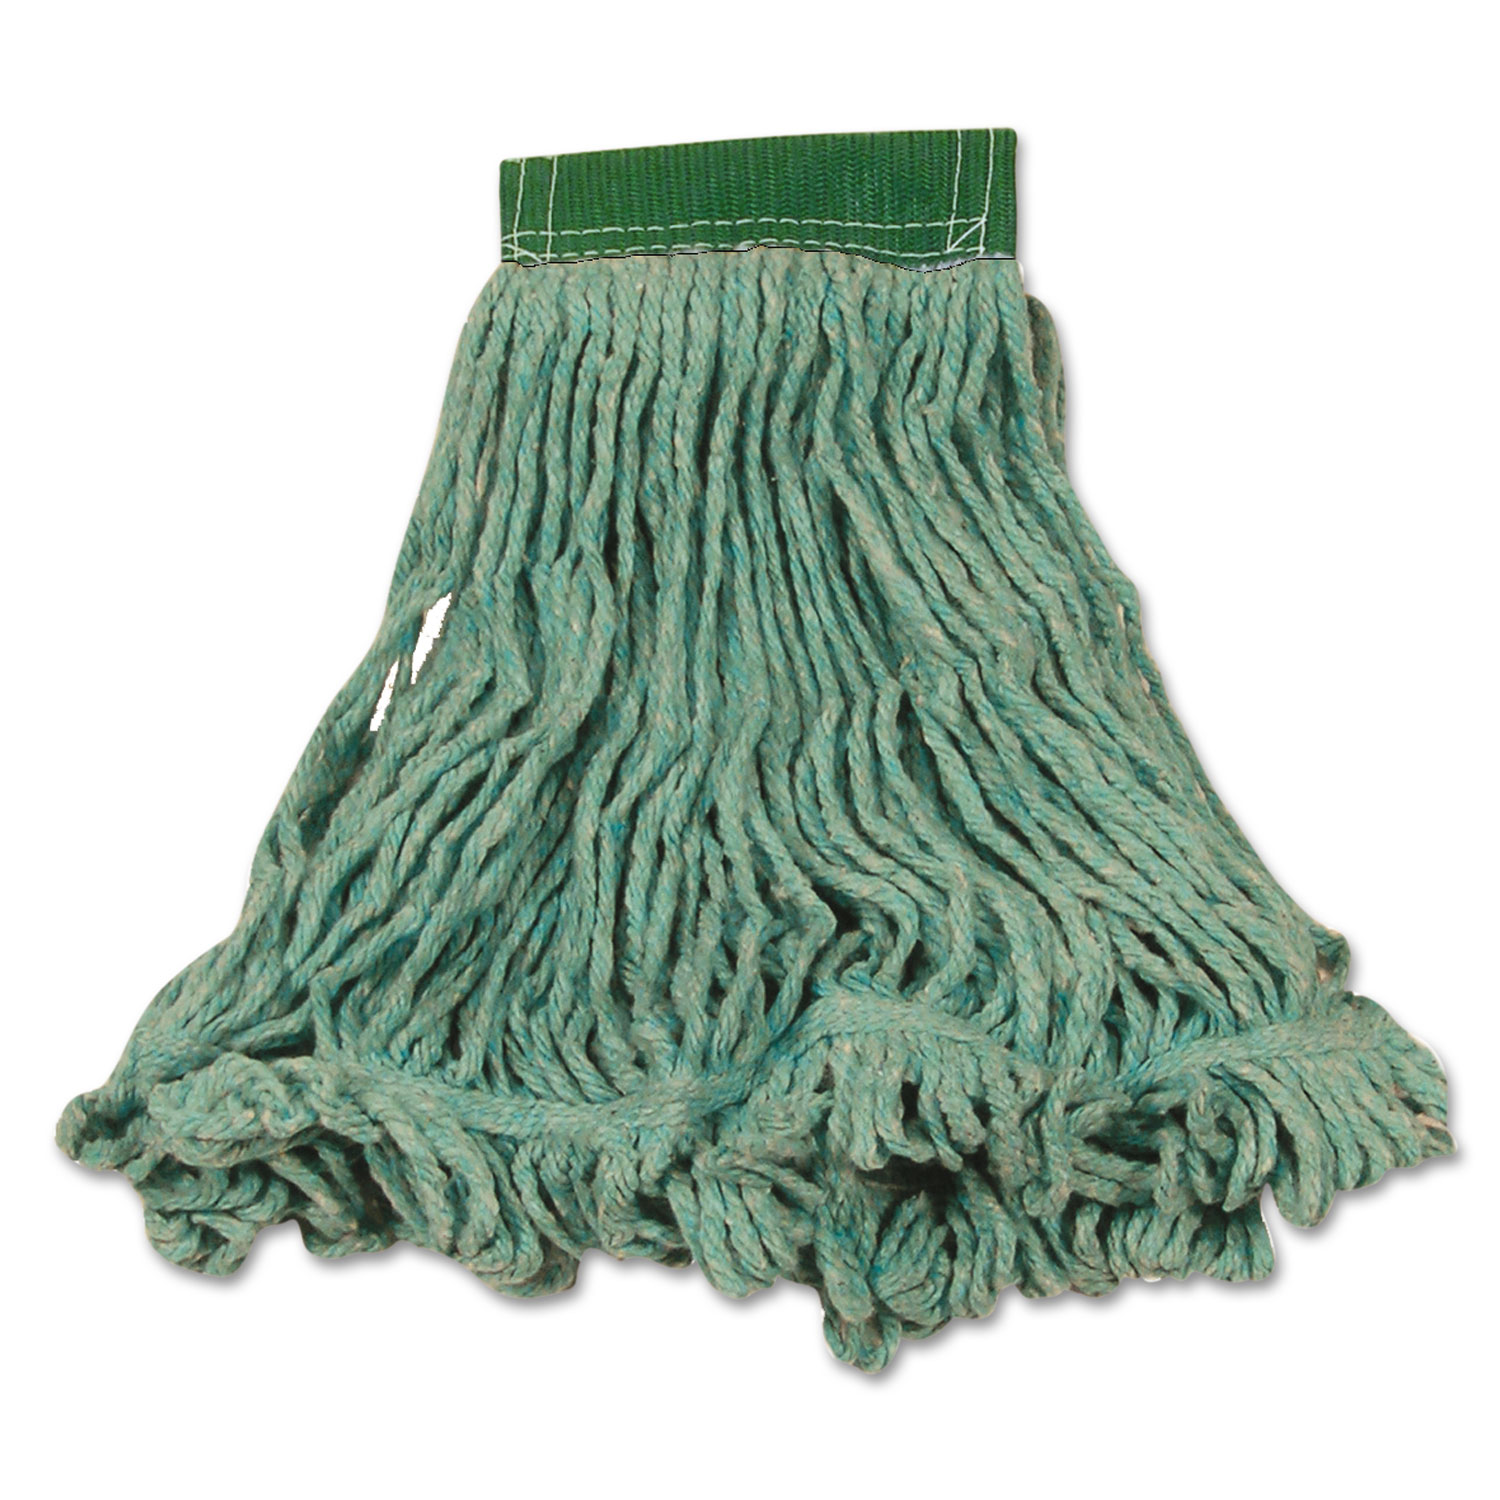  Rubbermaid Commercial FGD21206GR00 Super Stitch Blend Mop Heads, Cotton/Synthetic, Green, Medium, 6/Carton (RCPD212GRE) 